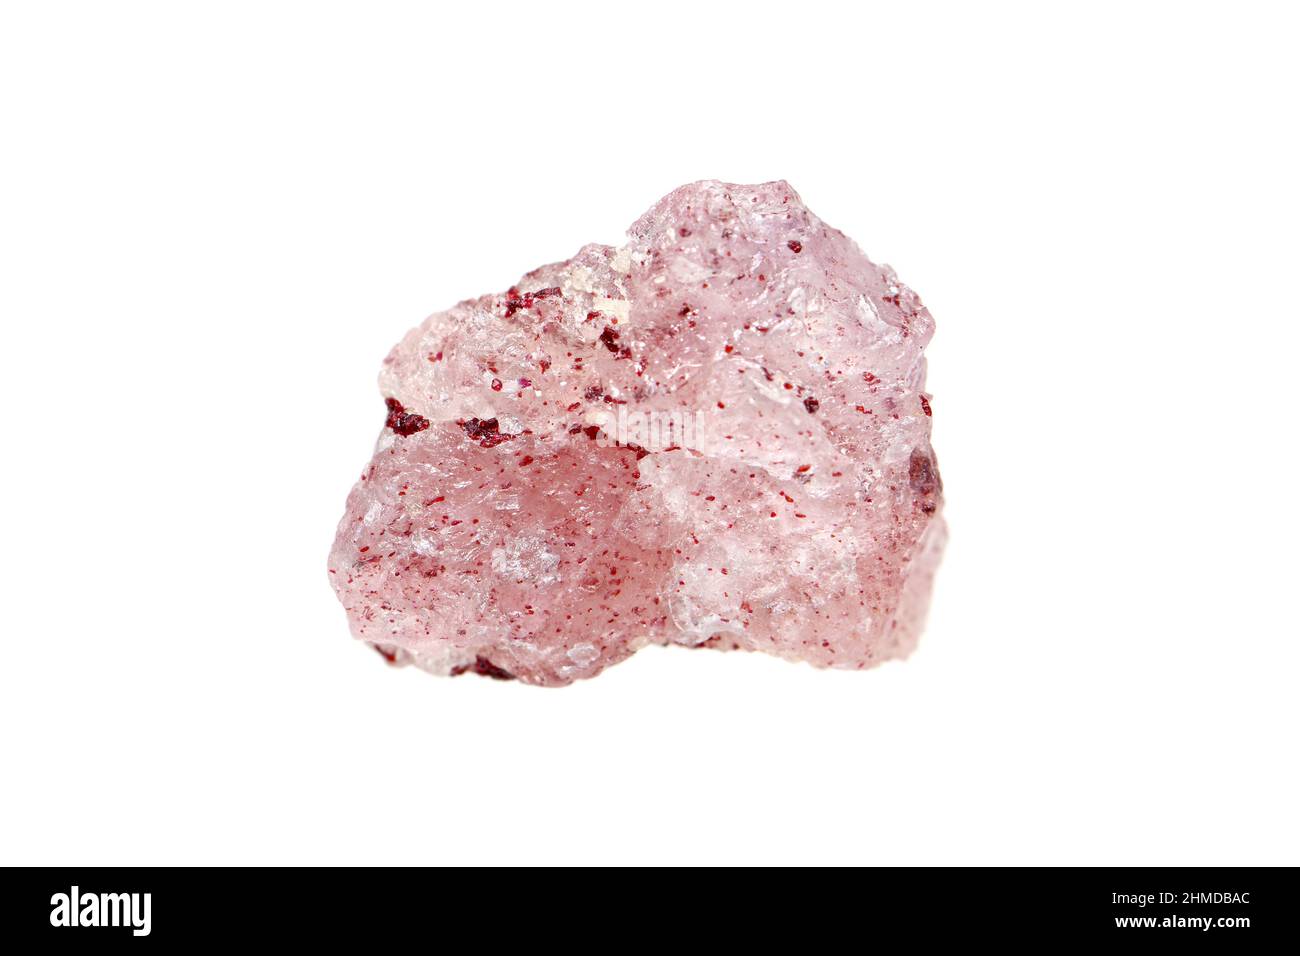 Closeup natural rough strawberry quartz (a rare variety of quartz that contain red inclusions of iron oxide) on white background (shallow dof) Stock Photo